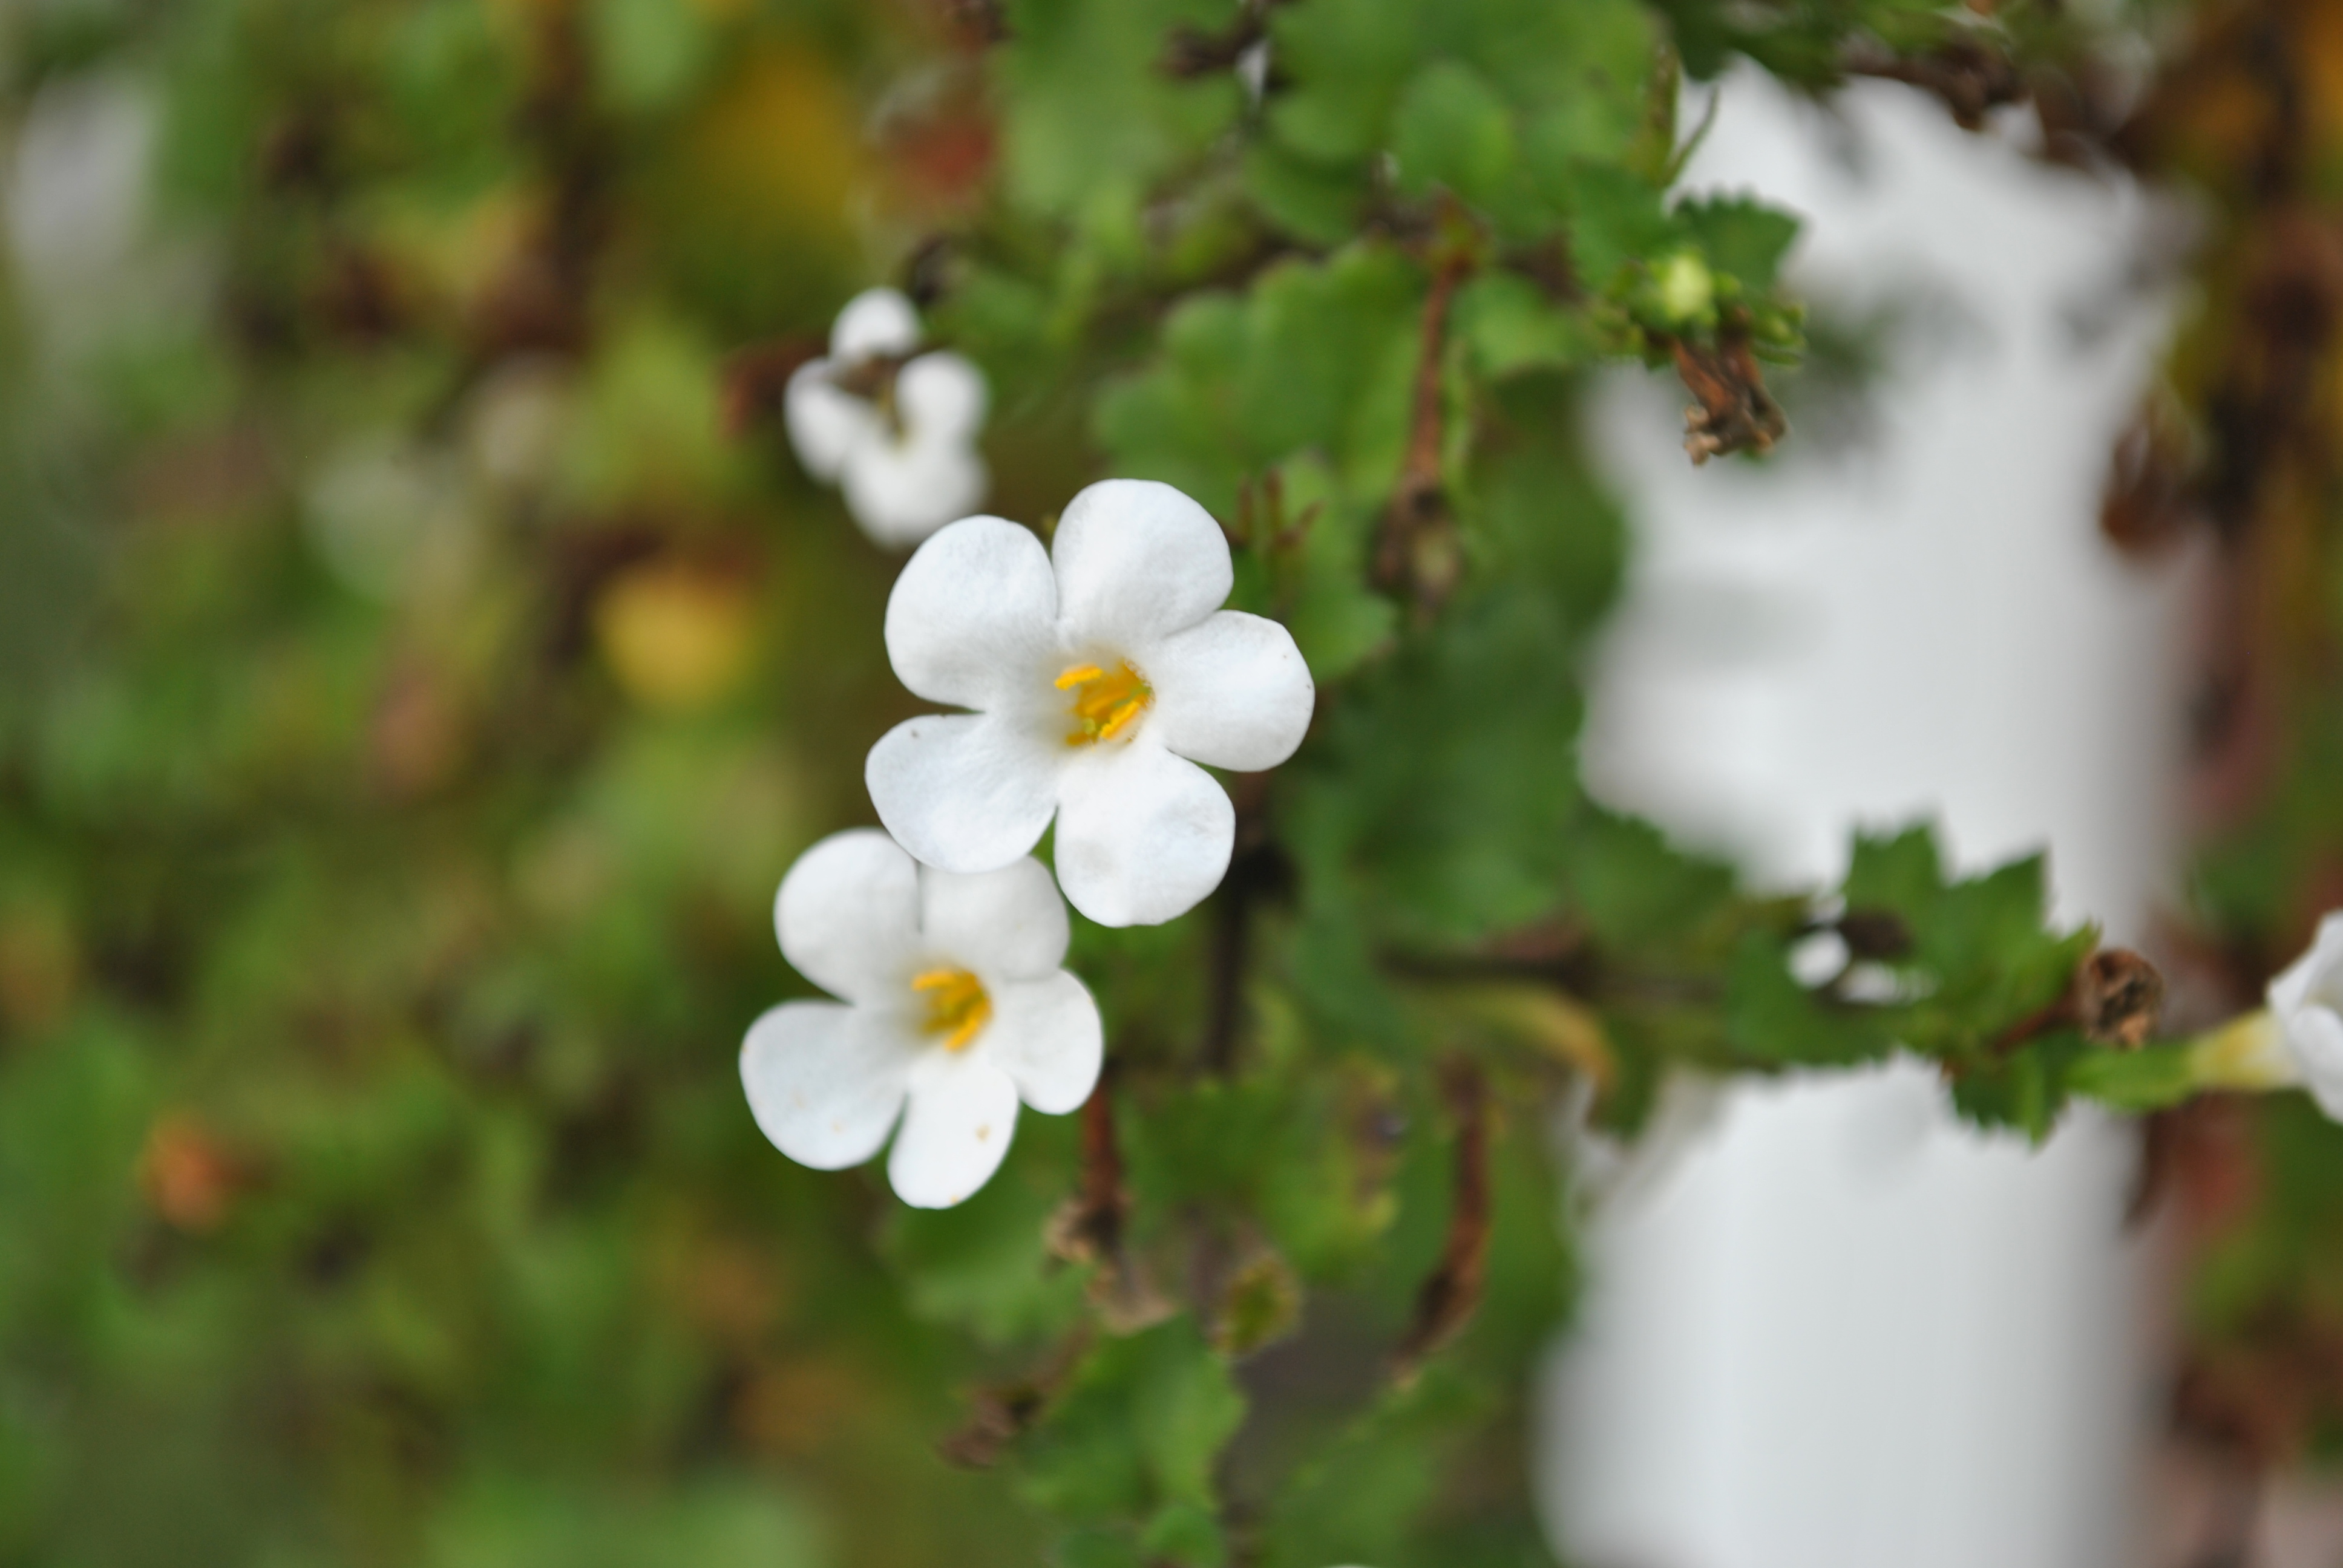 File:Pair of white blossoms.jpg - Wikimedia Commons